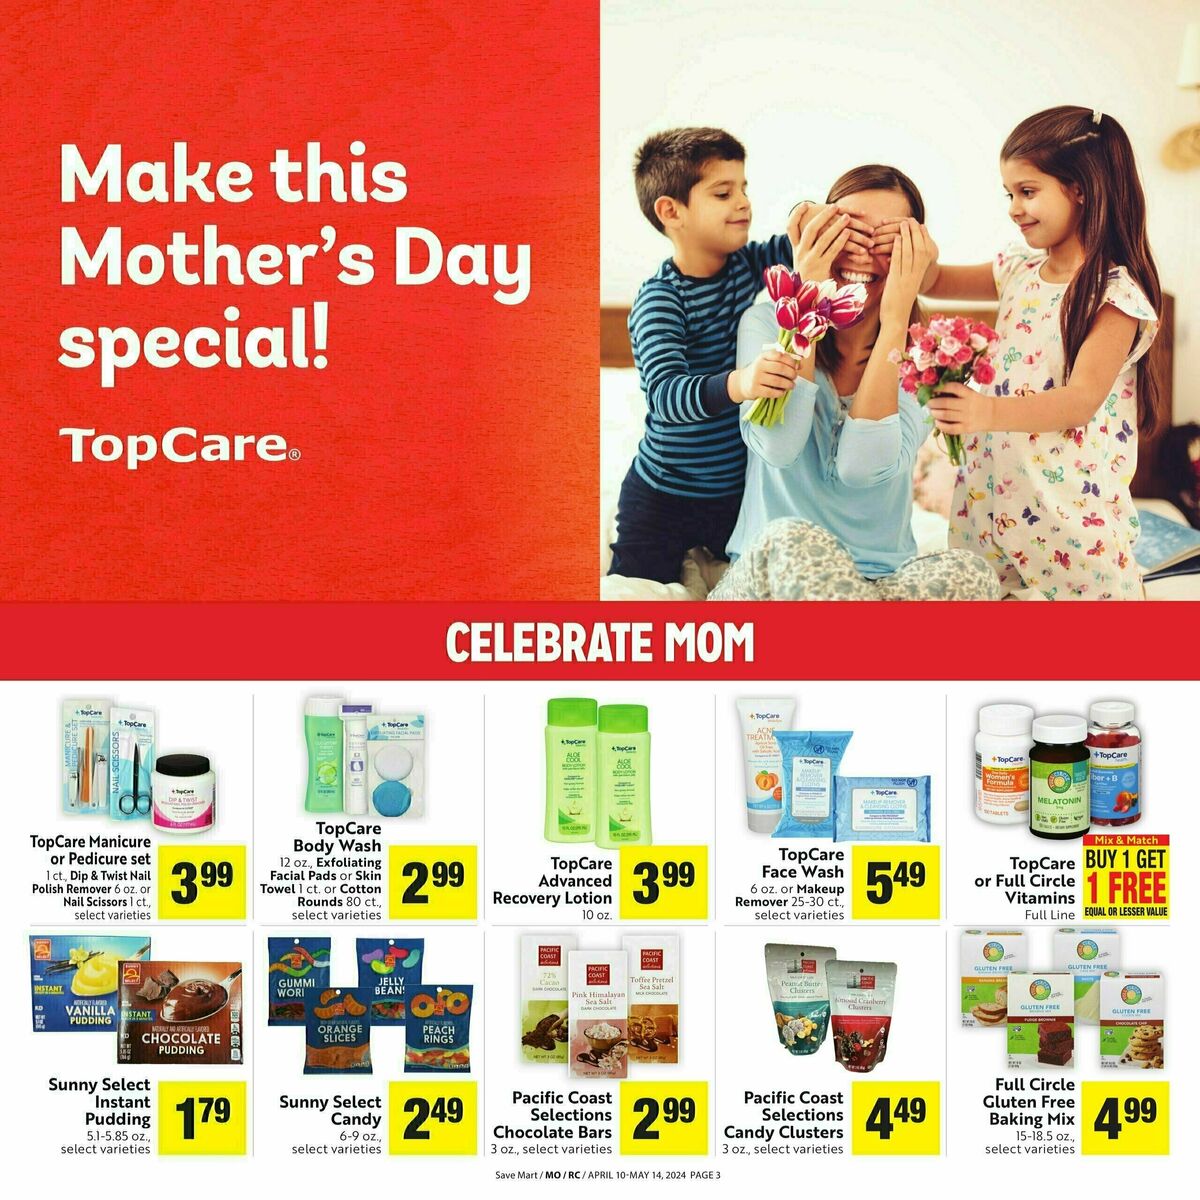 Save Mart Weekly Ad from April 10